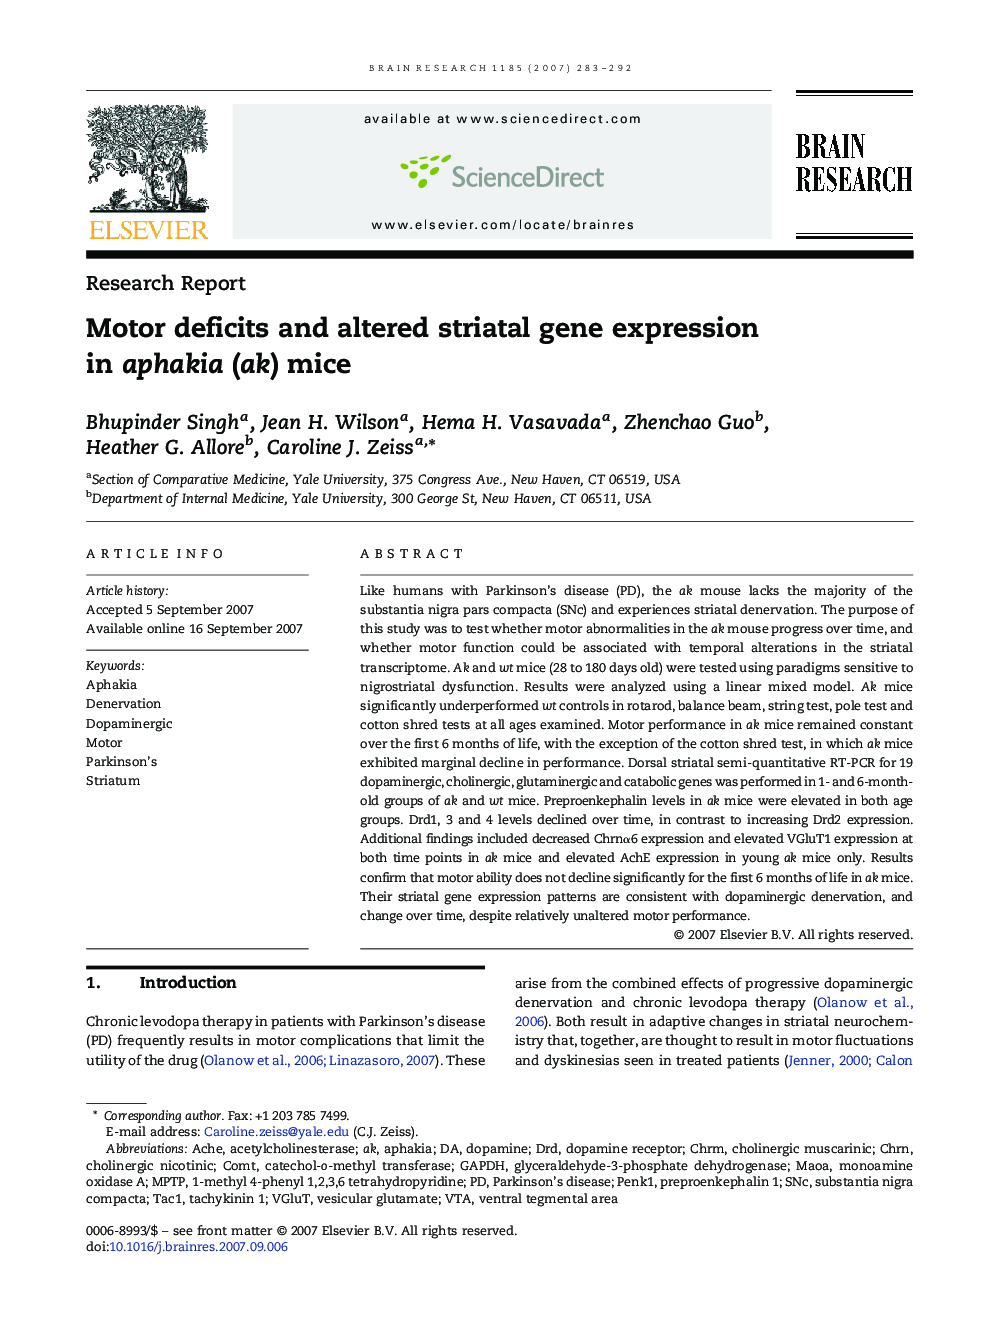 Motor deficits and altered striatal gene expression in aphakia (ak) mice